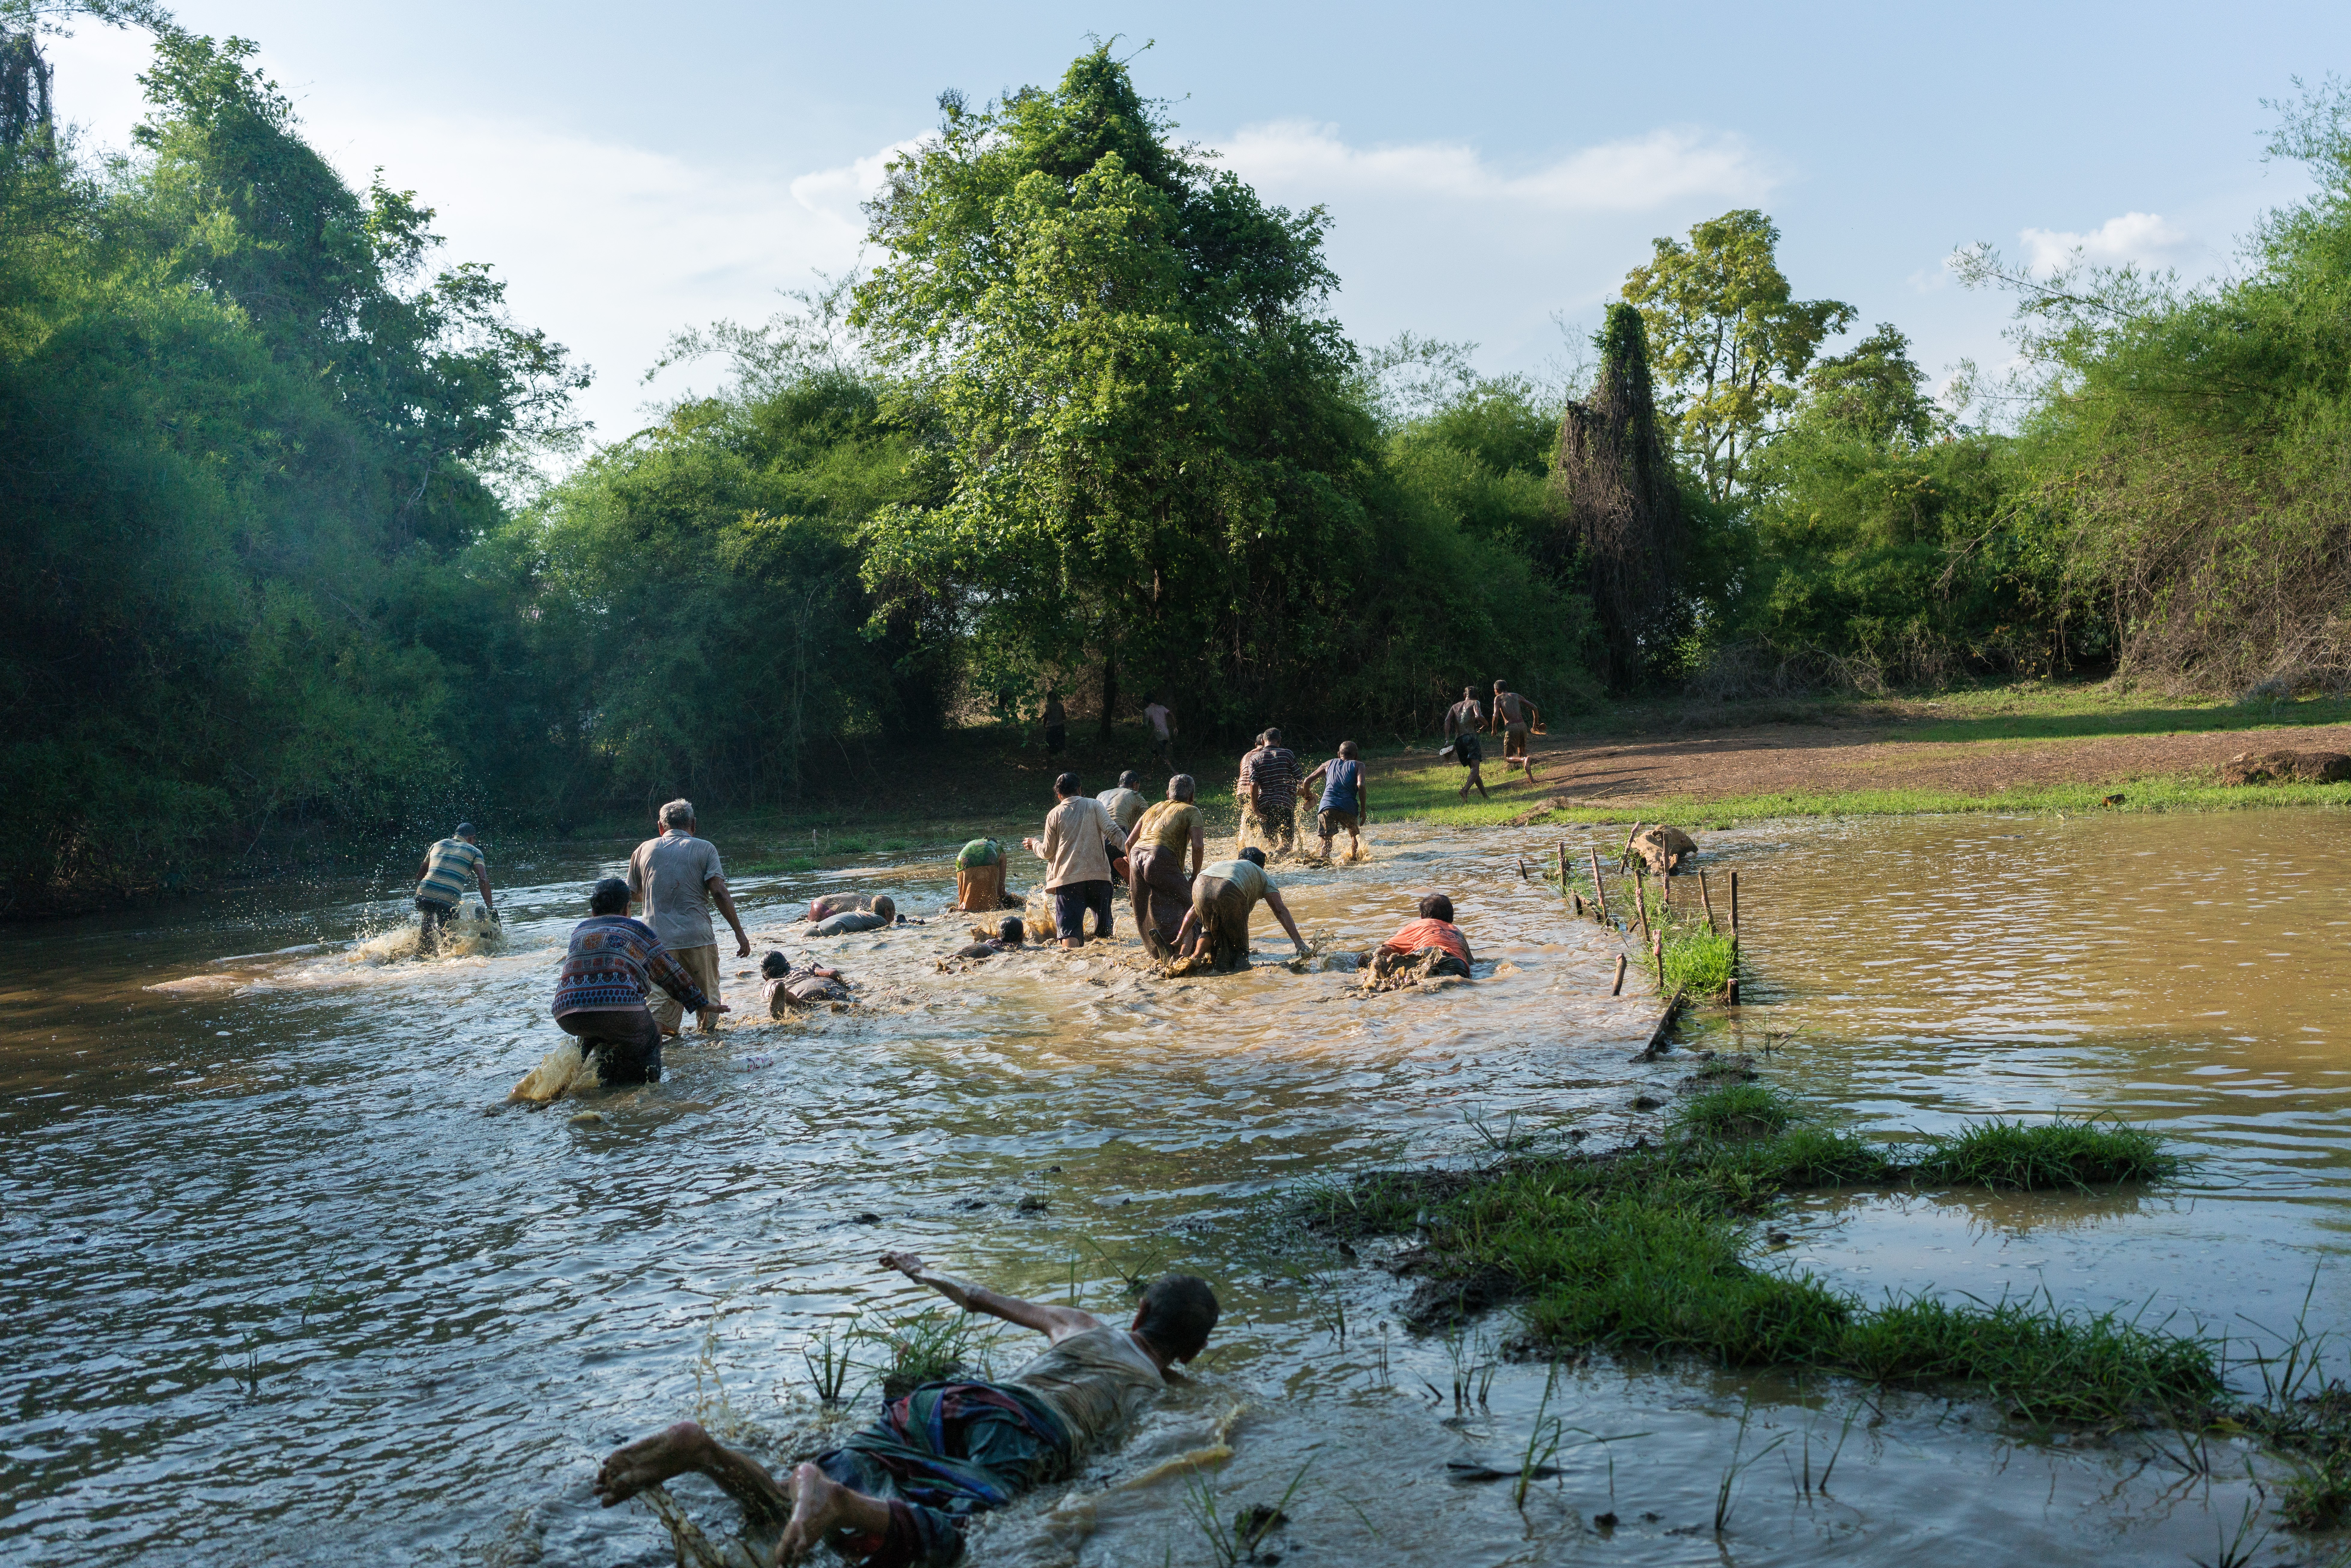 As part of a ritual to draw out the evil spirit known as Phi Pob, those accused of being possessed must crawl through a pond and cover themselves in mud before bathing in the Mekong. Pictures: Thomas Cristofoletti